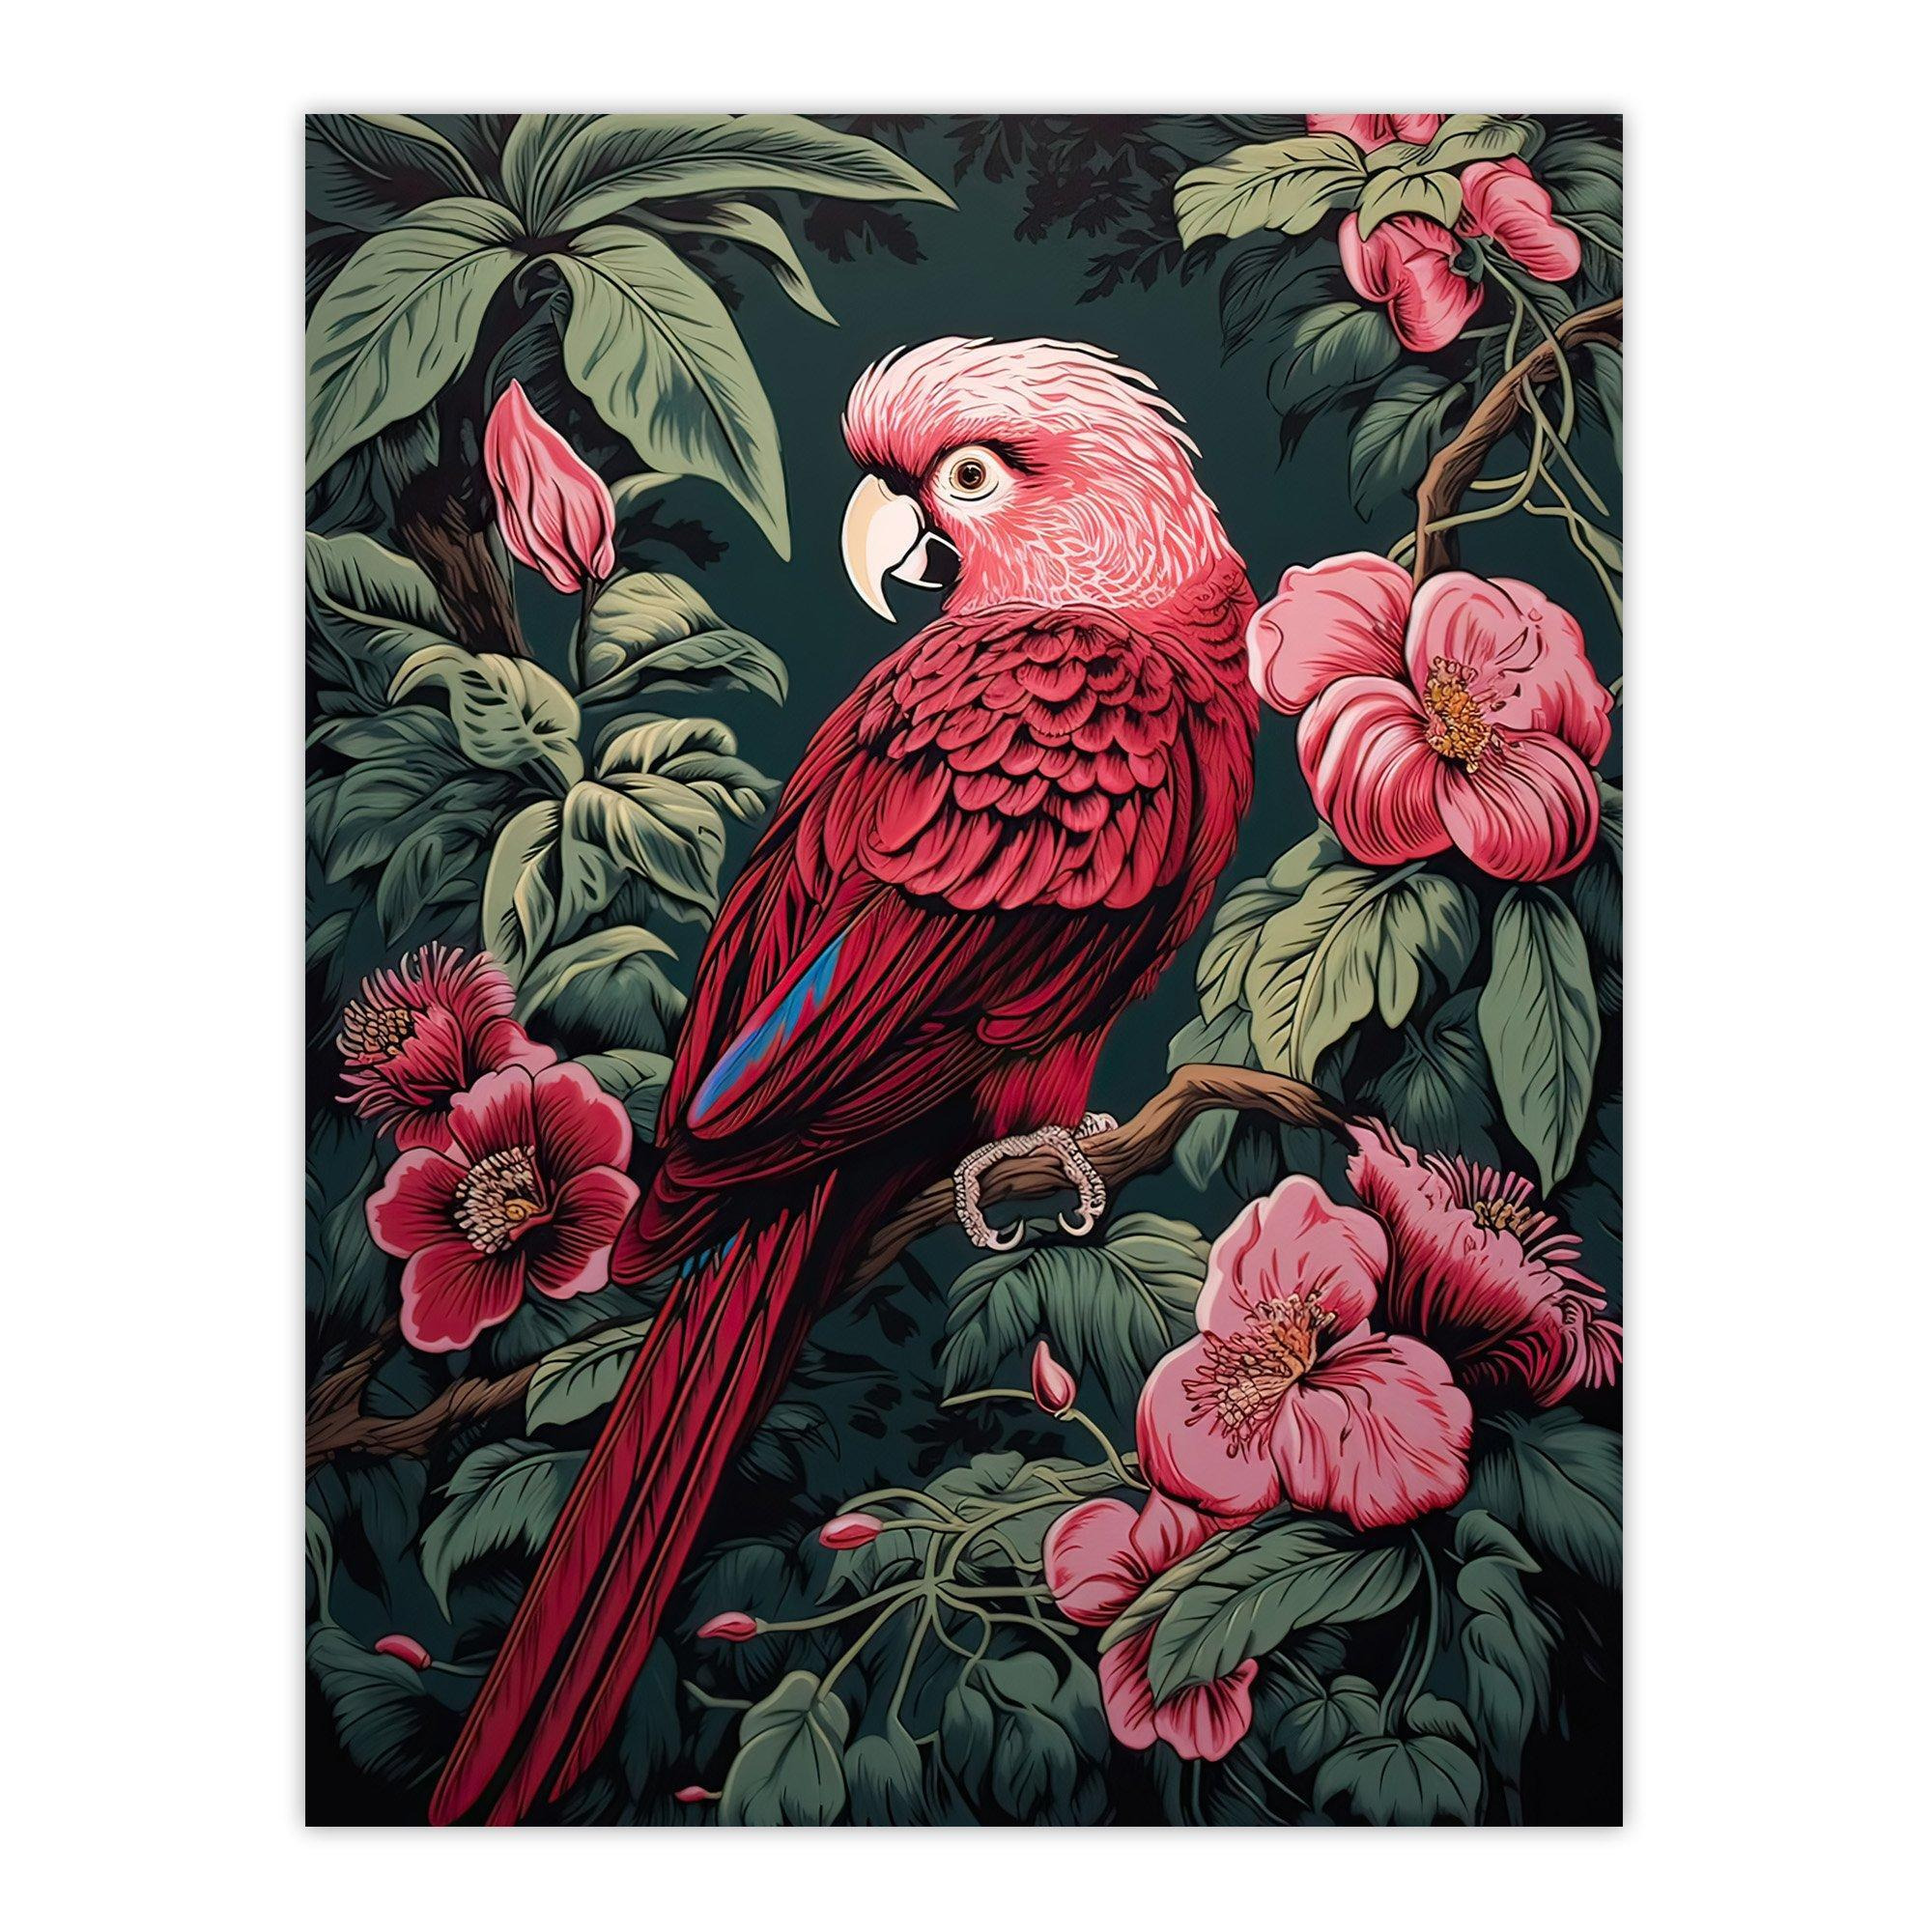 Parrot on Blooming Flower Tree Branch Vintage Painting Burgundy Pink Green Jungle Bird Portrait Unframed Wall Art Print Poster Home Decor Premium - image 1